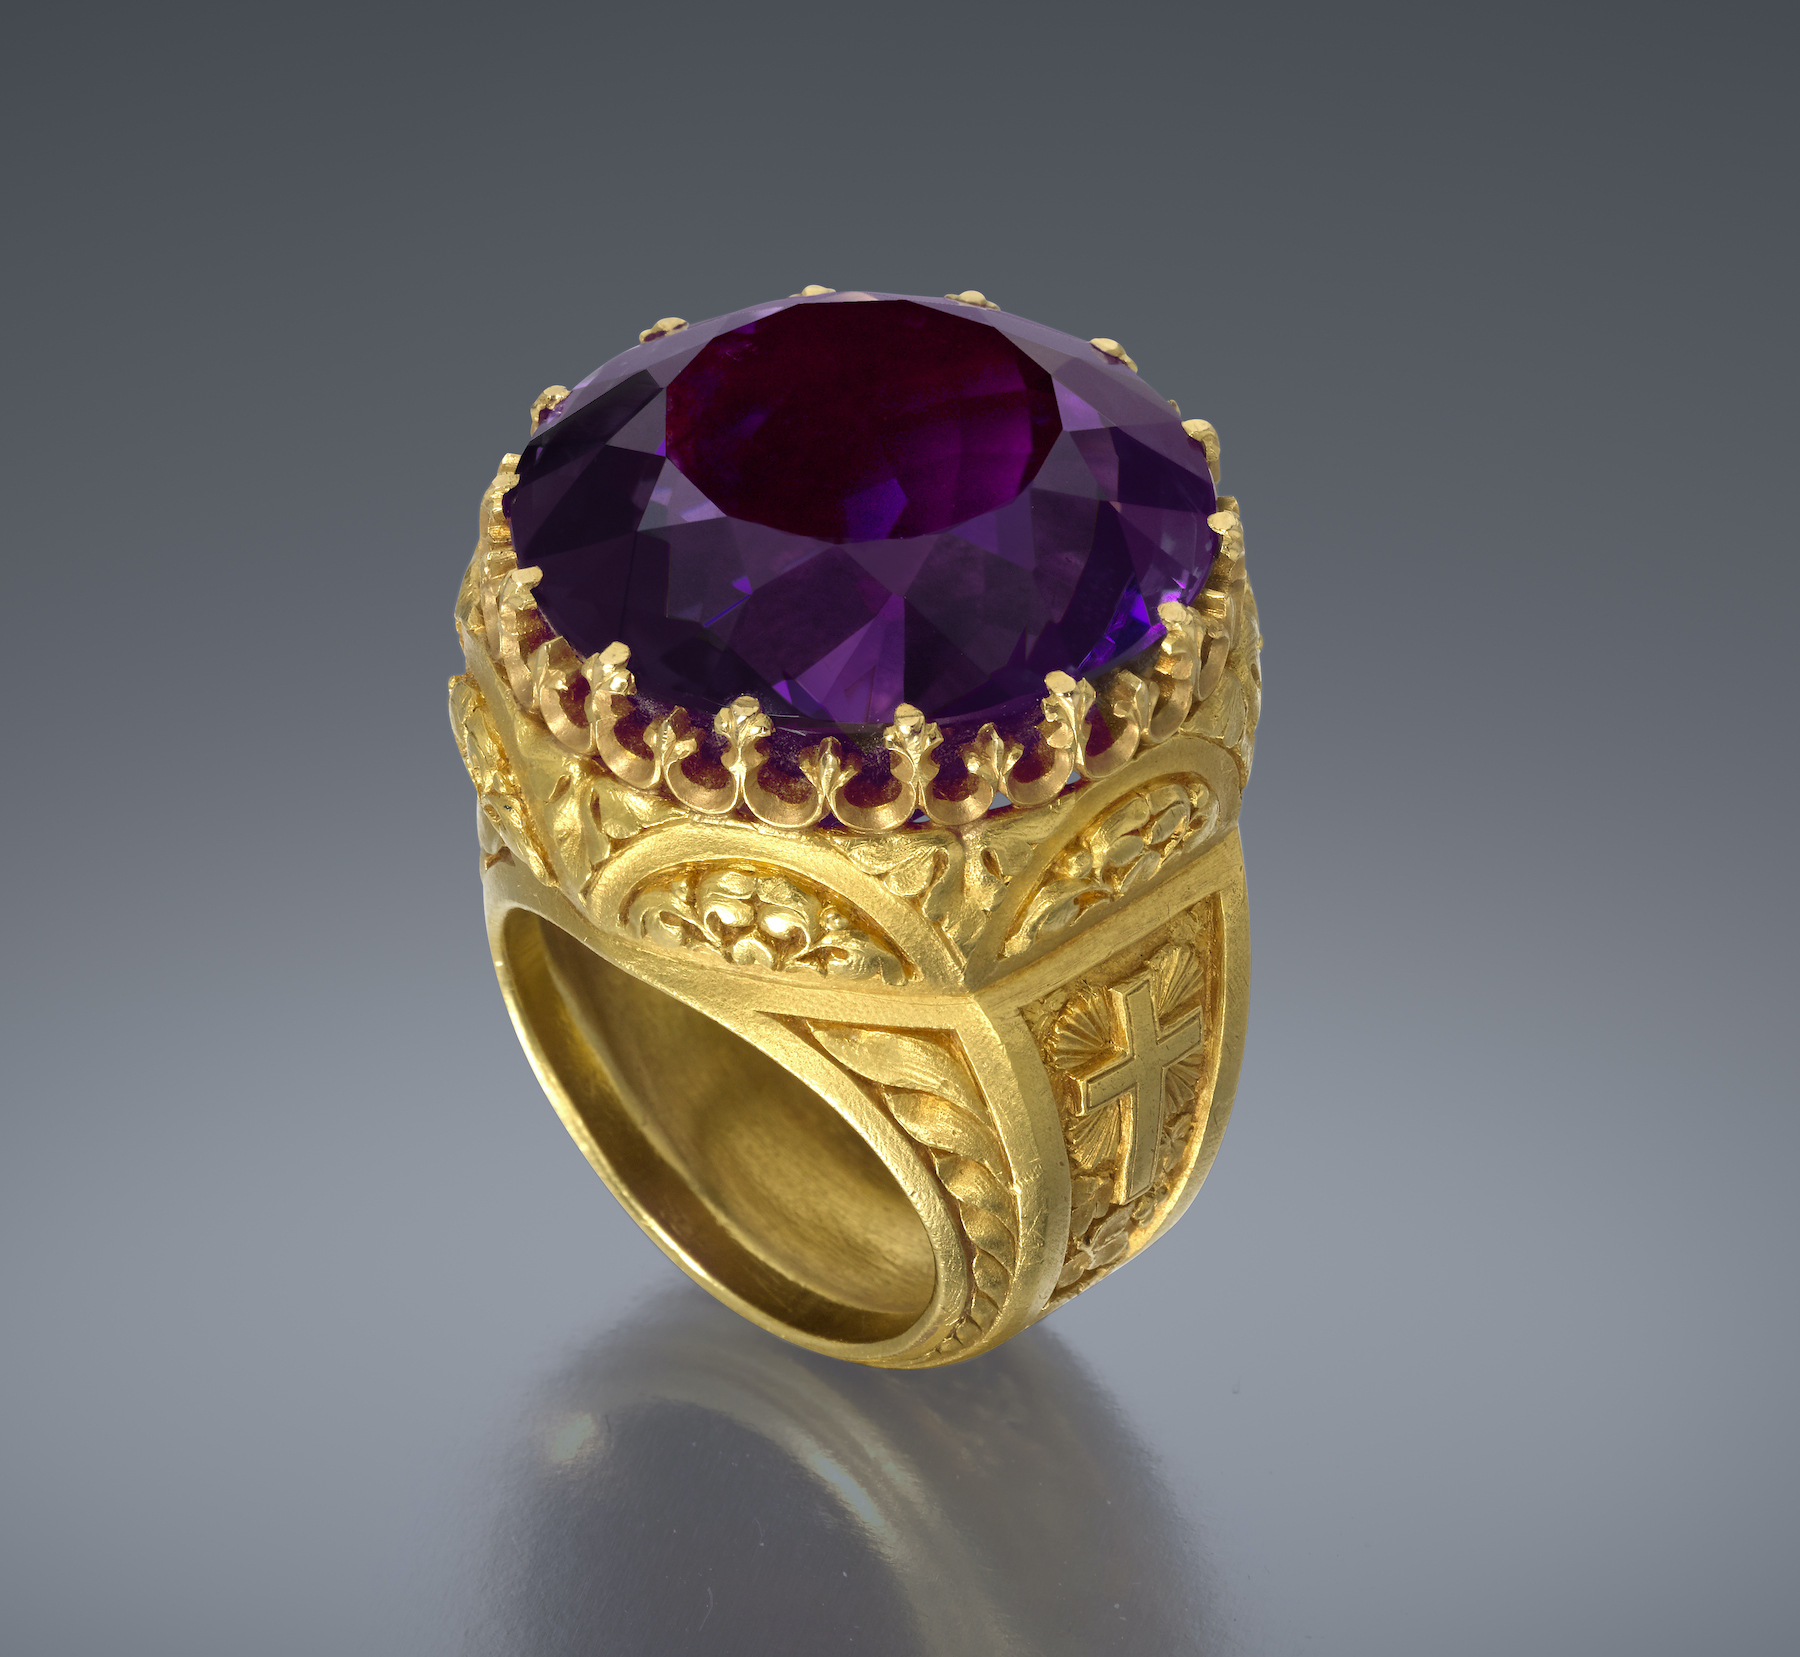 Dreicer & Co., New York, “Bishop’s” ring, elaborately detailed Gothic Revival 18K gold ring set with a large round cut “Siberian” amethyst (approx. 55 carats TW), original leather and silk velvet and satin lined box, c.1880